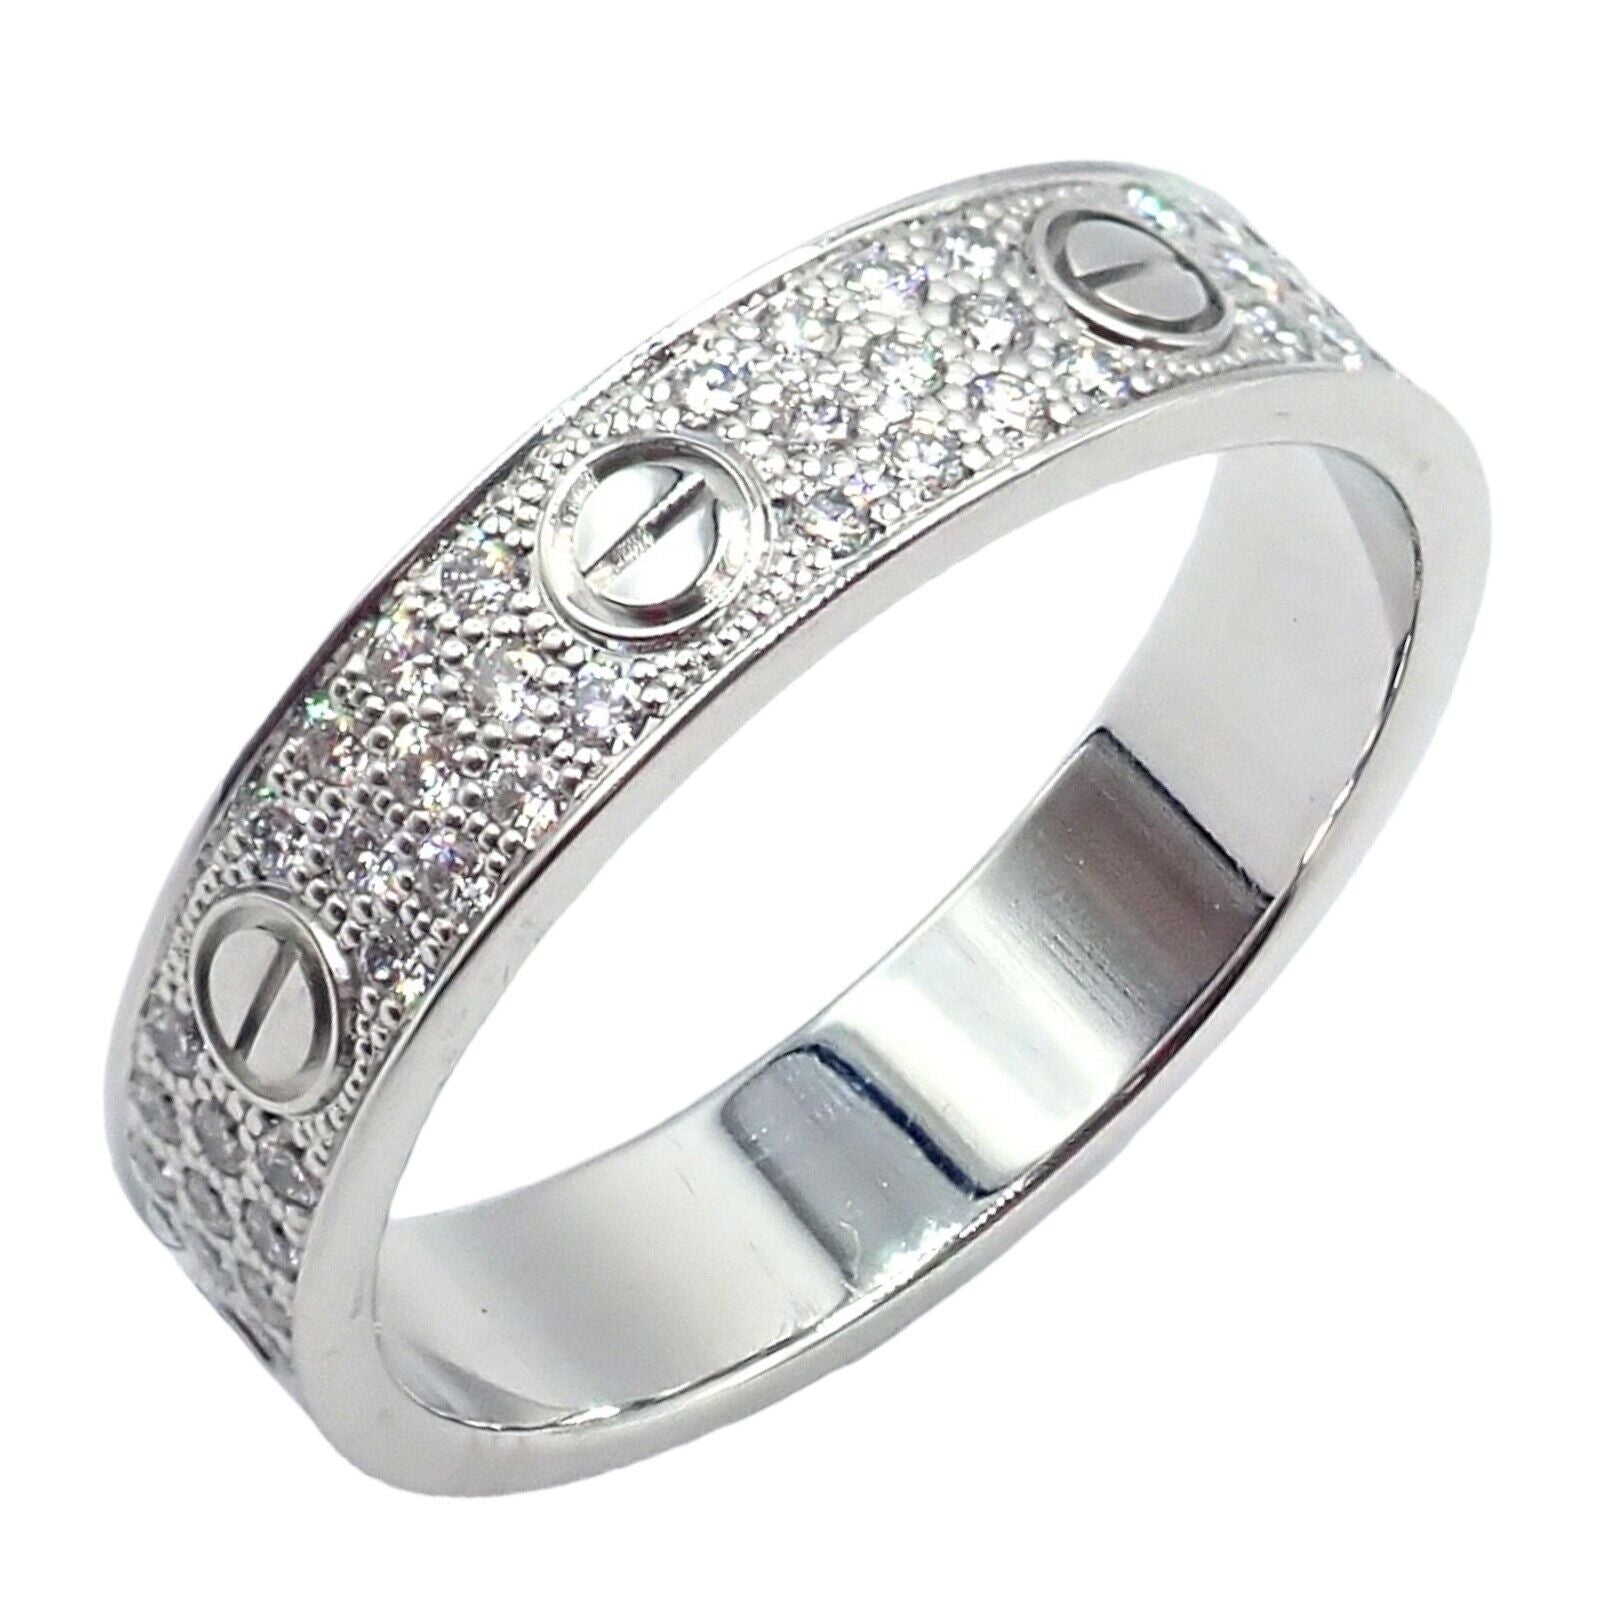 Cartier Jewelry & Watches:Fine Jewelry:Rings Authentic! Cartier Love 18k White Gold Diamond Paved Ring sz 8 57